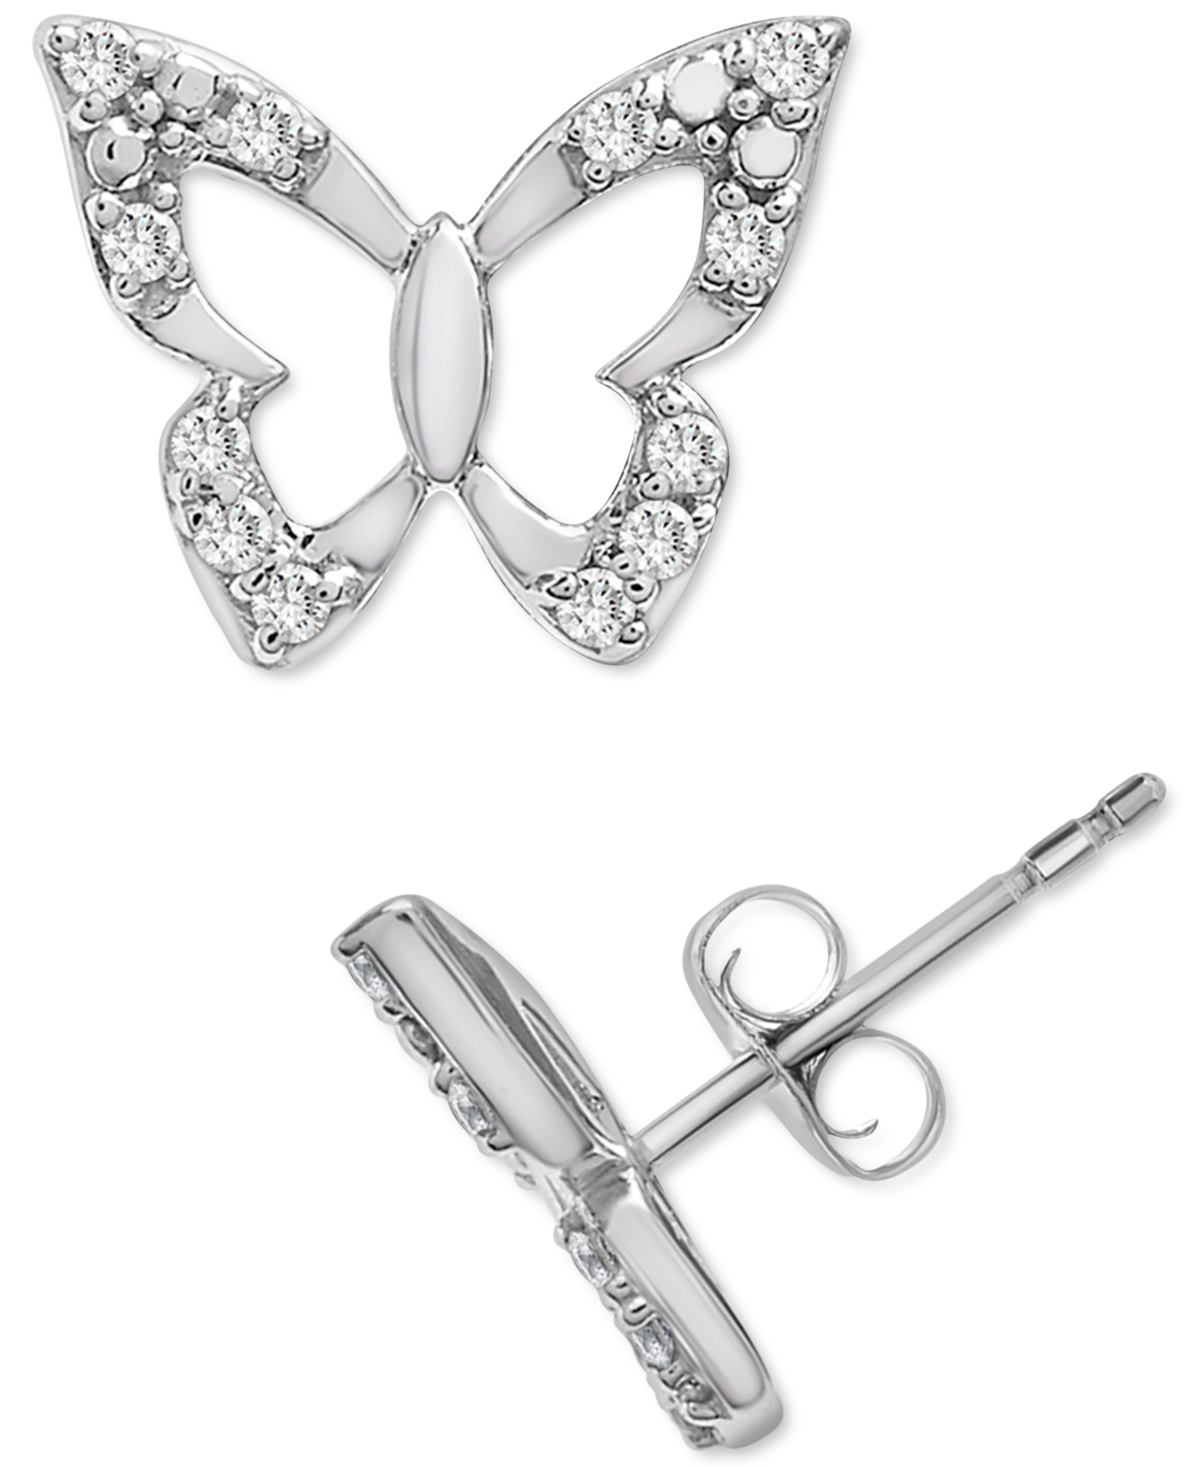 Diamond Butterfly Stud Earrings (1/10 ct. t.w.) in 14k White Gold, Created for Macy's - White Gold